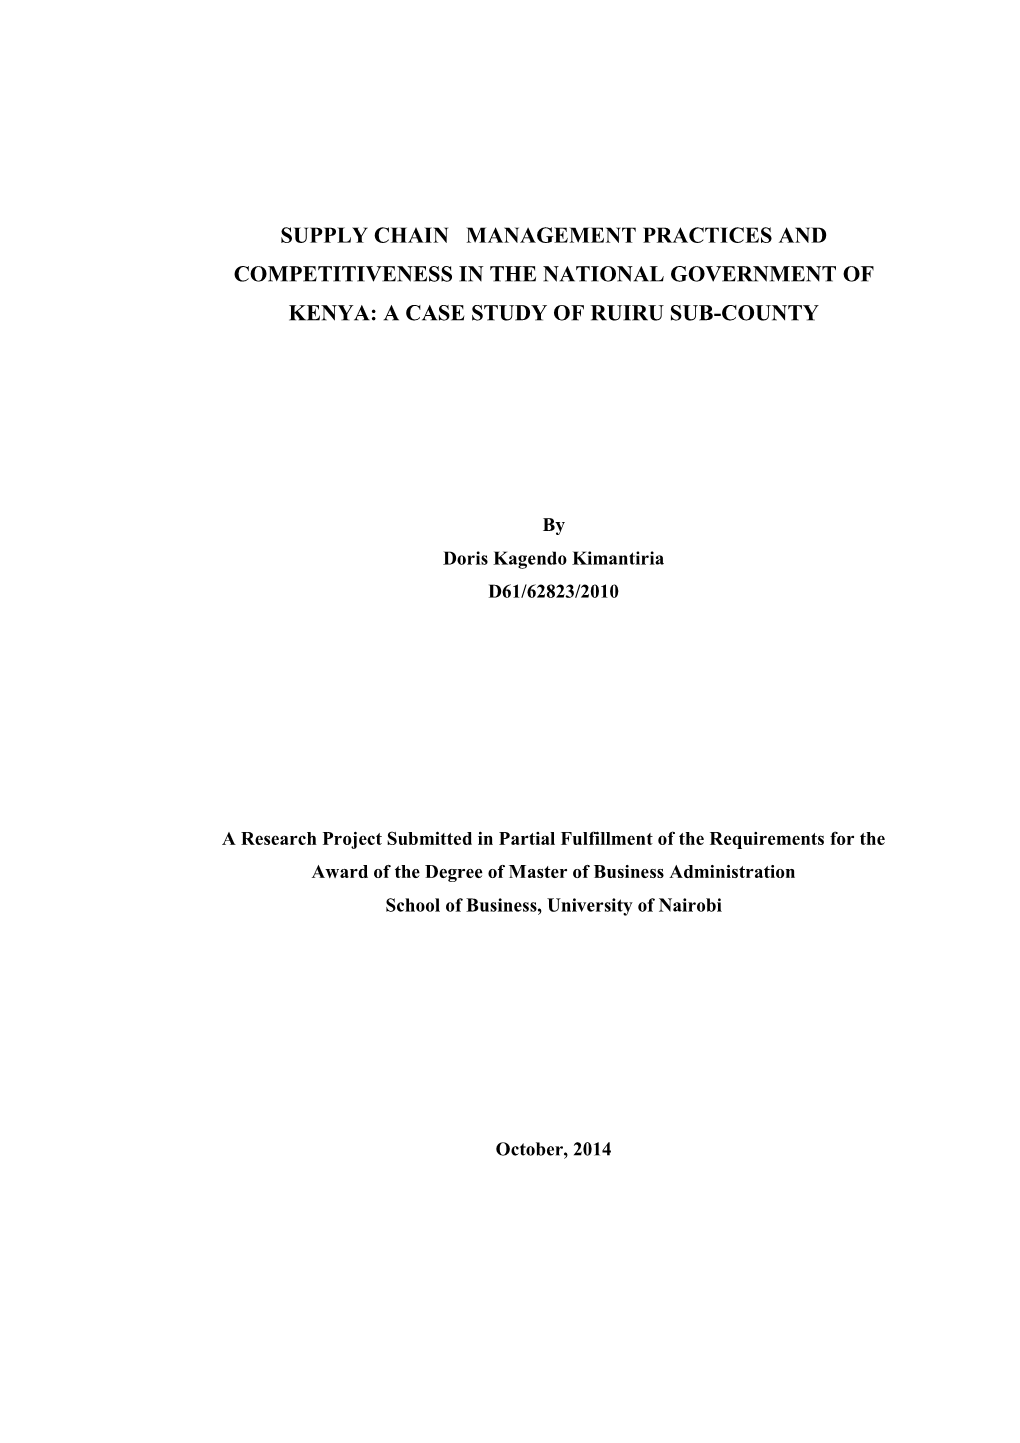 Supply Chain Management Practices and Competitiveness in the National Government of Kenya: a Case Study of Ruiru Sub-County